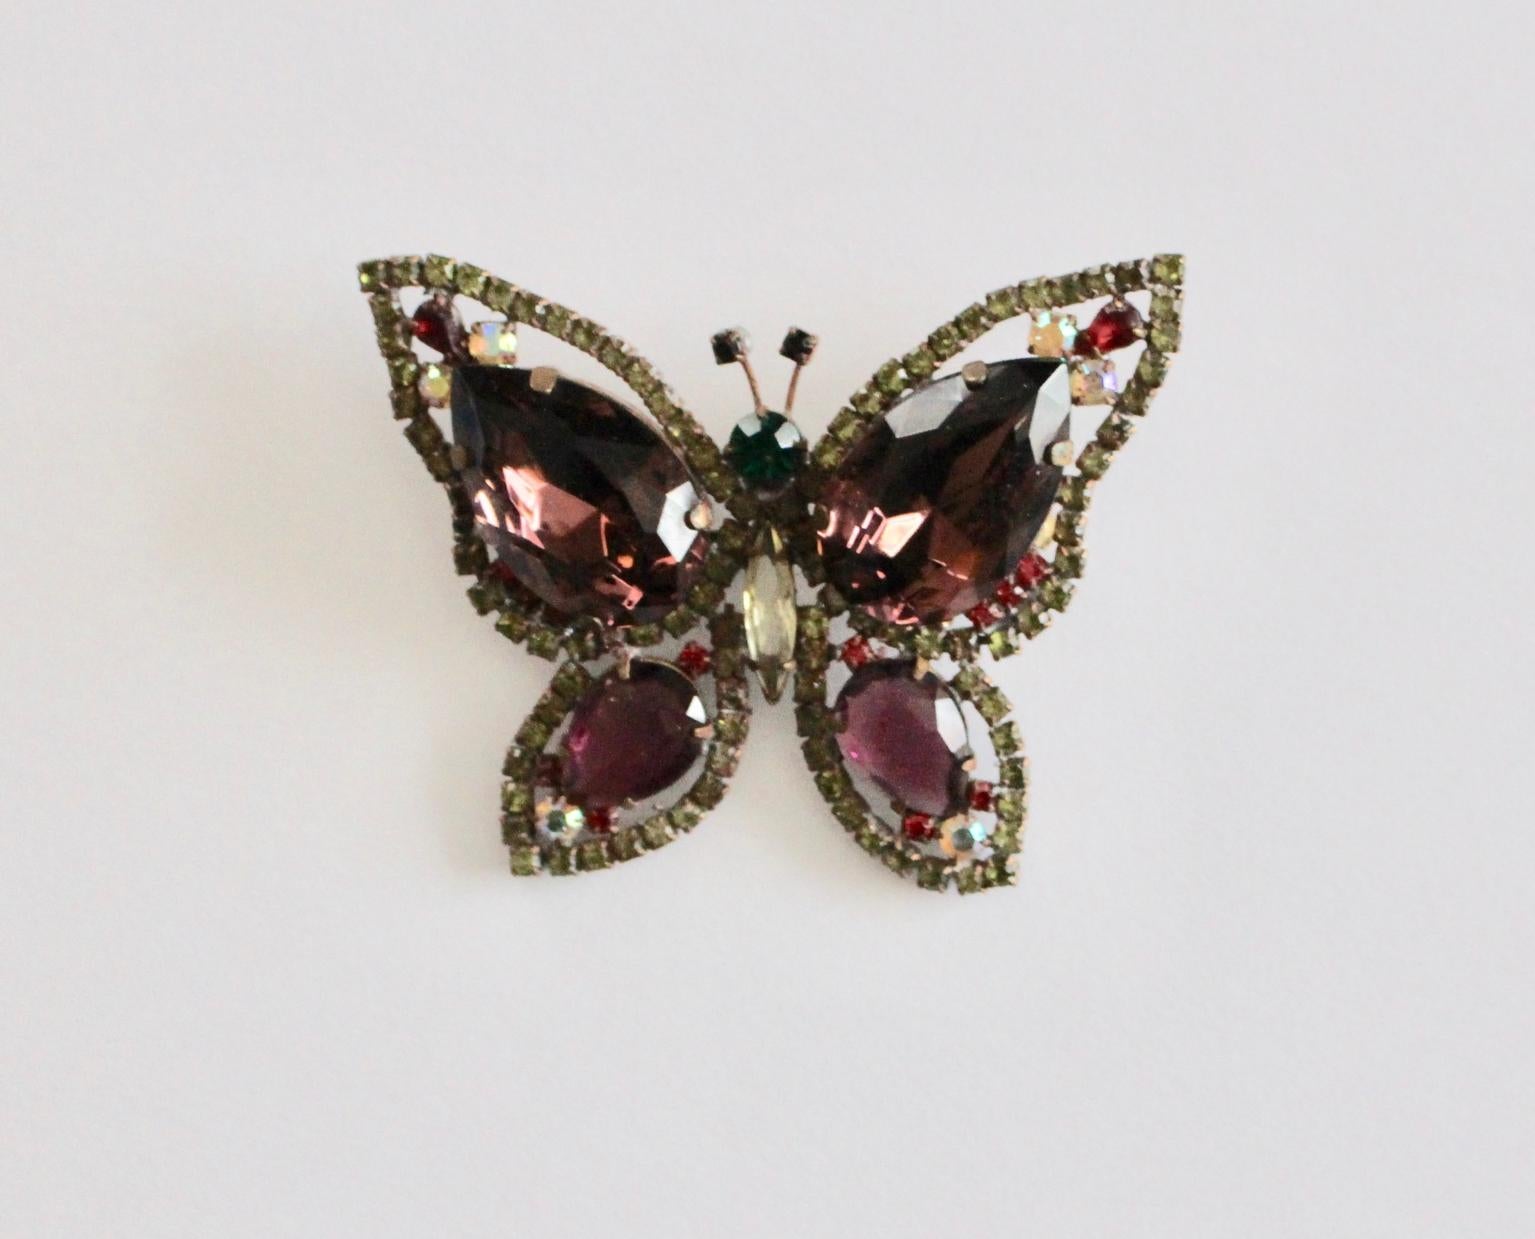 This presented butterfly brooch shows various size facetted stones in the colors lilac, green and red.
Also the stones are set on a light metal frame to create the structure.
The vintage condition is very good.
approx. measures:
height 6 cm
width